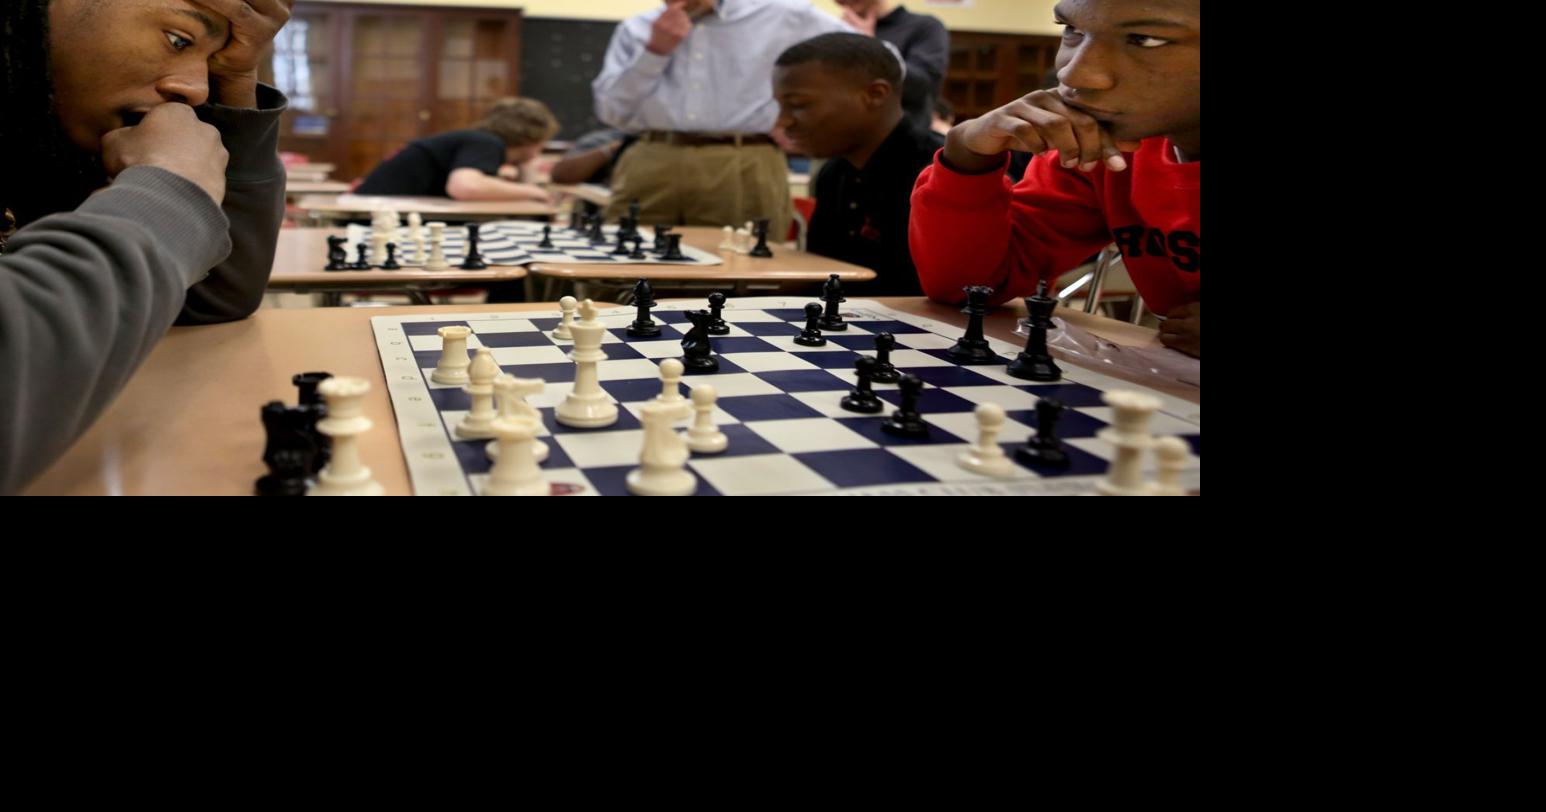 It's Official: Webster University Launches a Minor in Chess